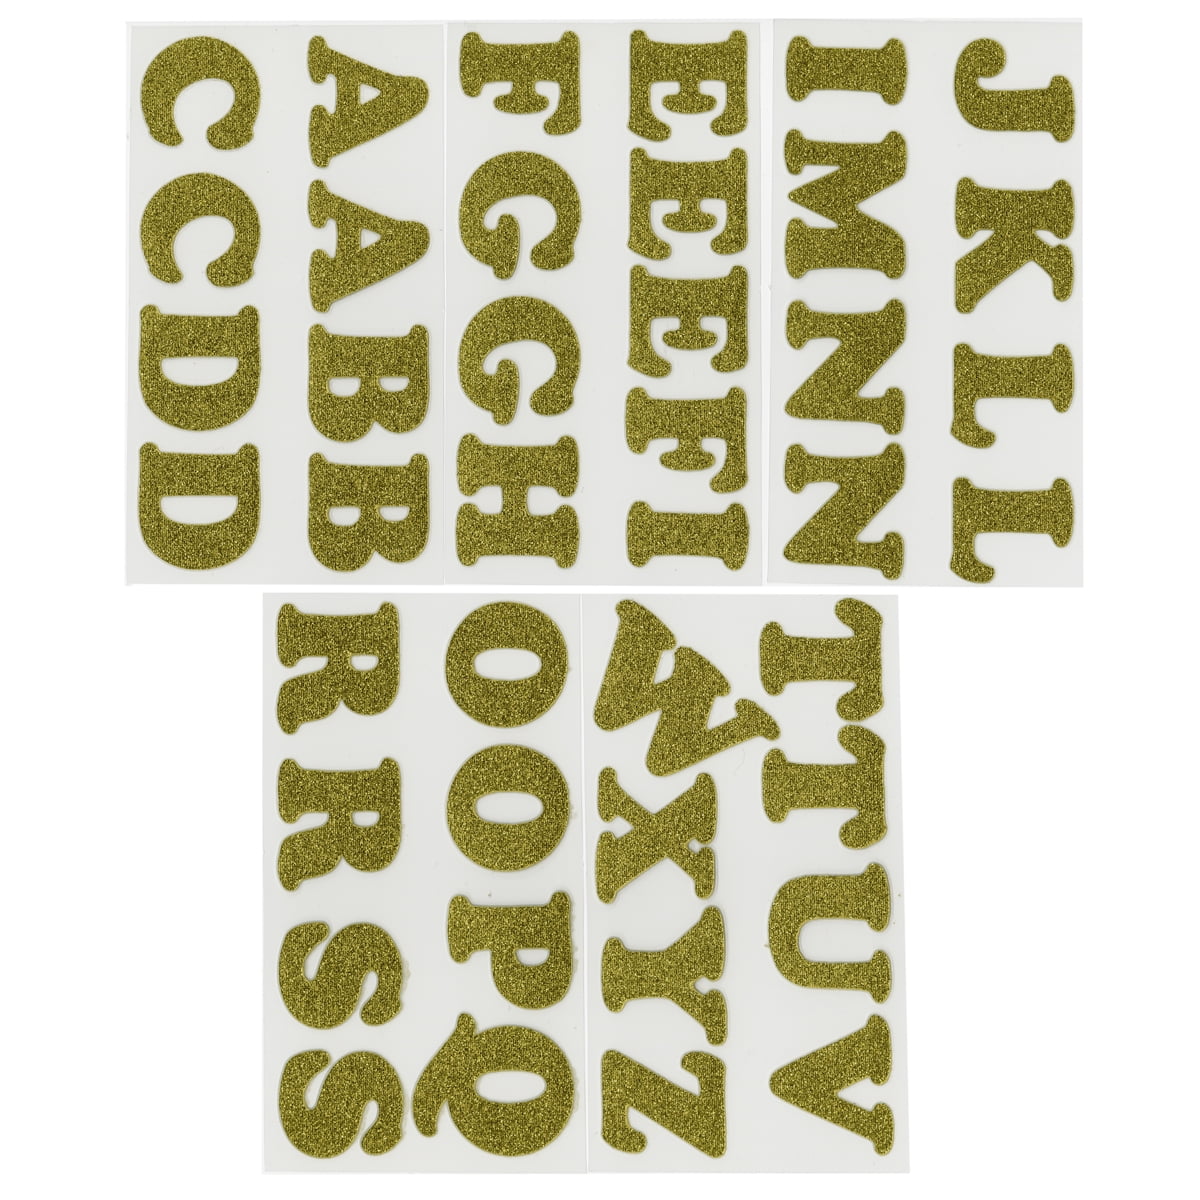 Iron-On Letters .75 Cooper - NOTM101814